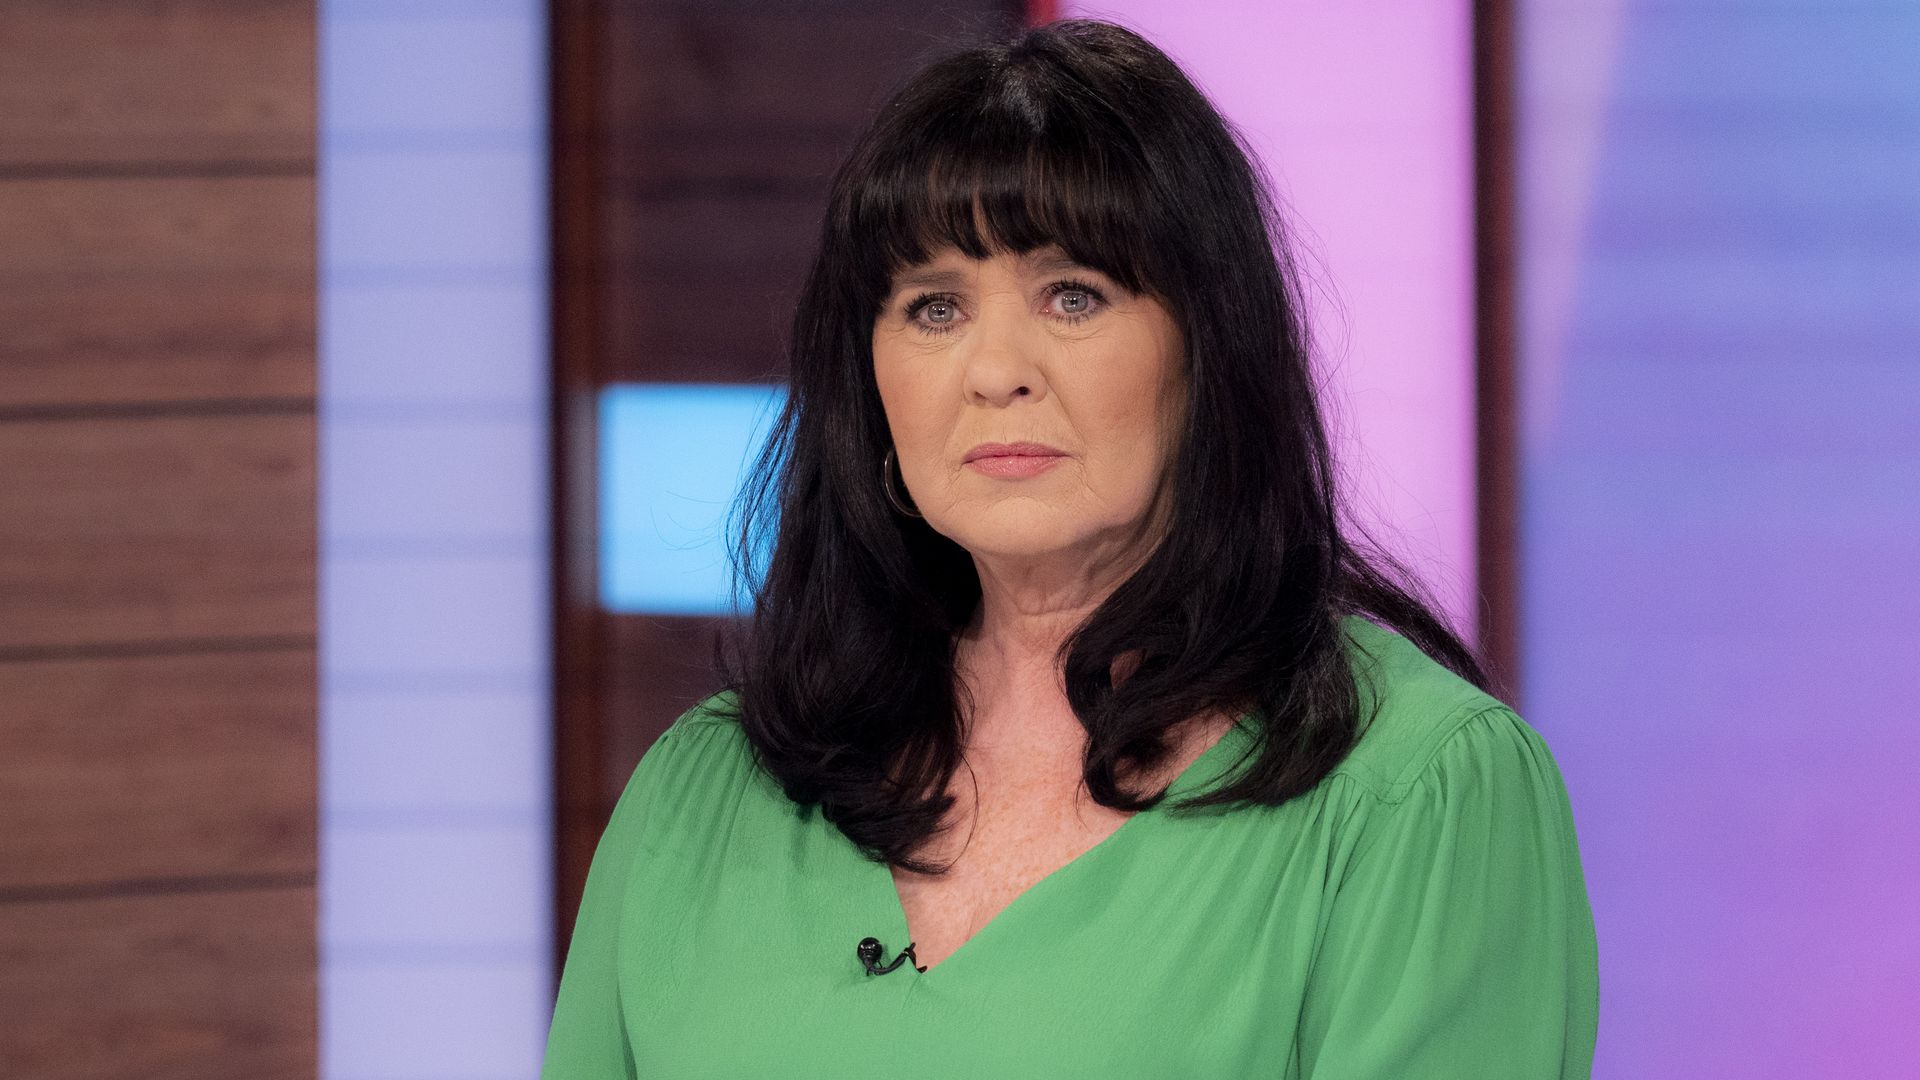 Coleen Nolan looking serious in a green top on Loose Women